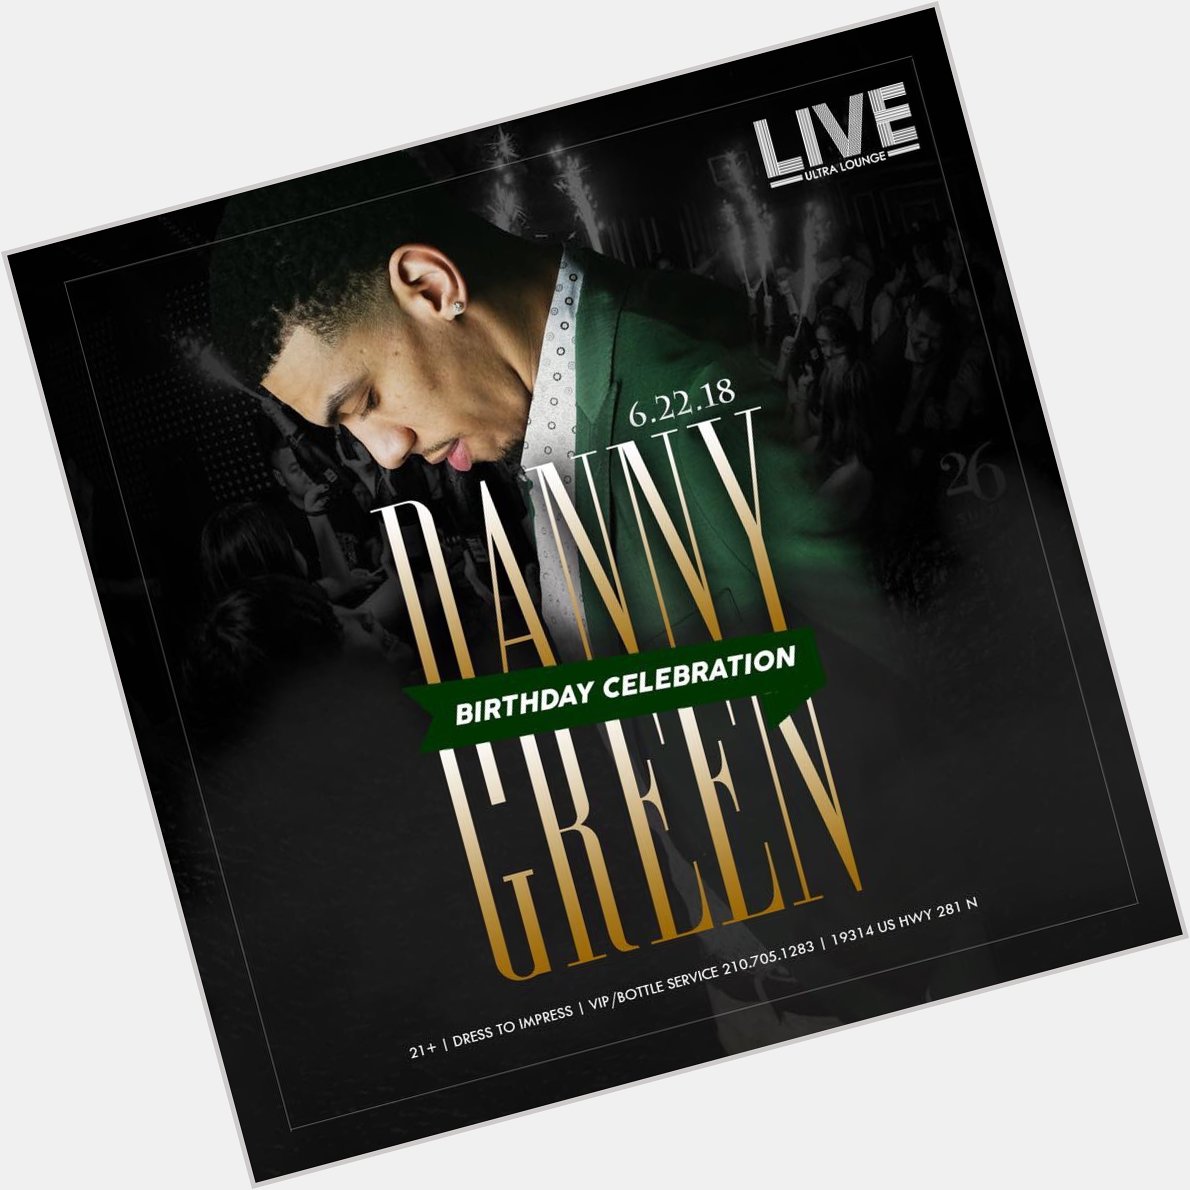 Happy birthday to San Antonio Spurs star Danny Green.  Celebrate with him tonight at LIVE Ultra Lounge! 